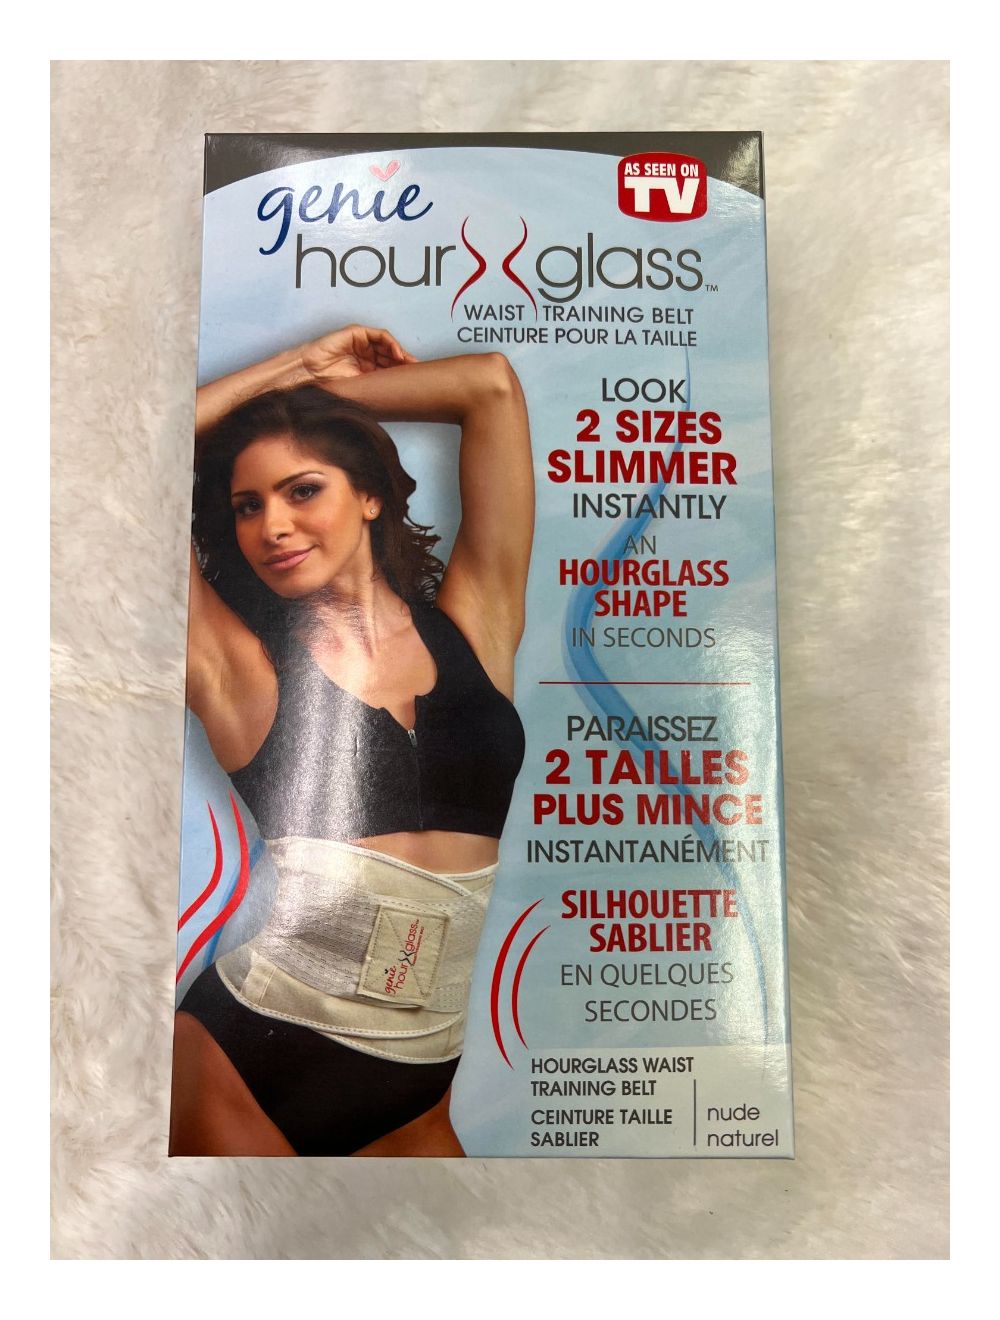 GENIE HOUR GLASS WAIST TRAINING BELT -NUDE -L/XL - AS SEEN ON TV PRODUCT